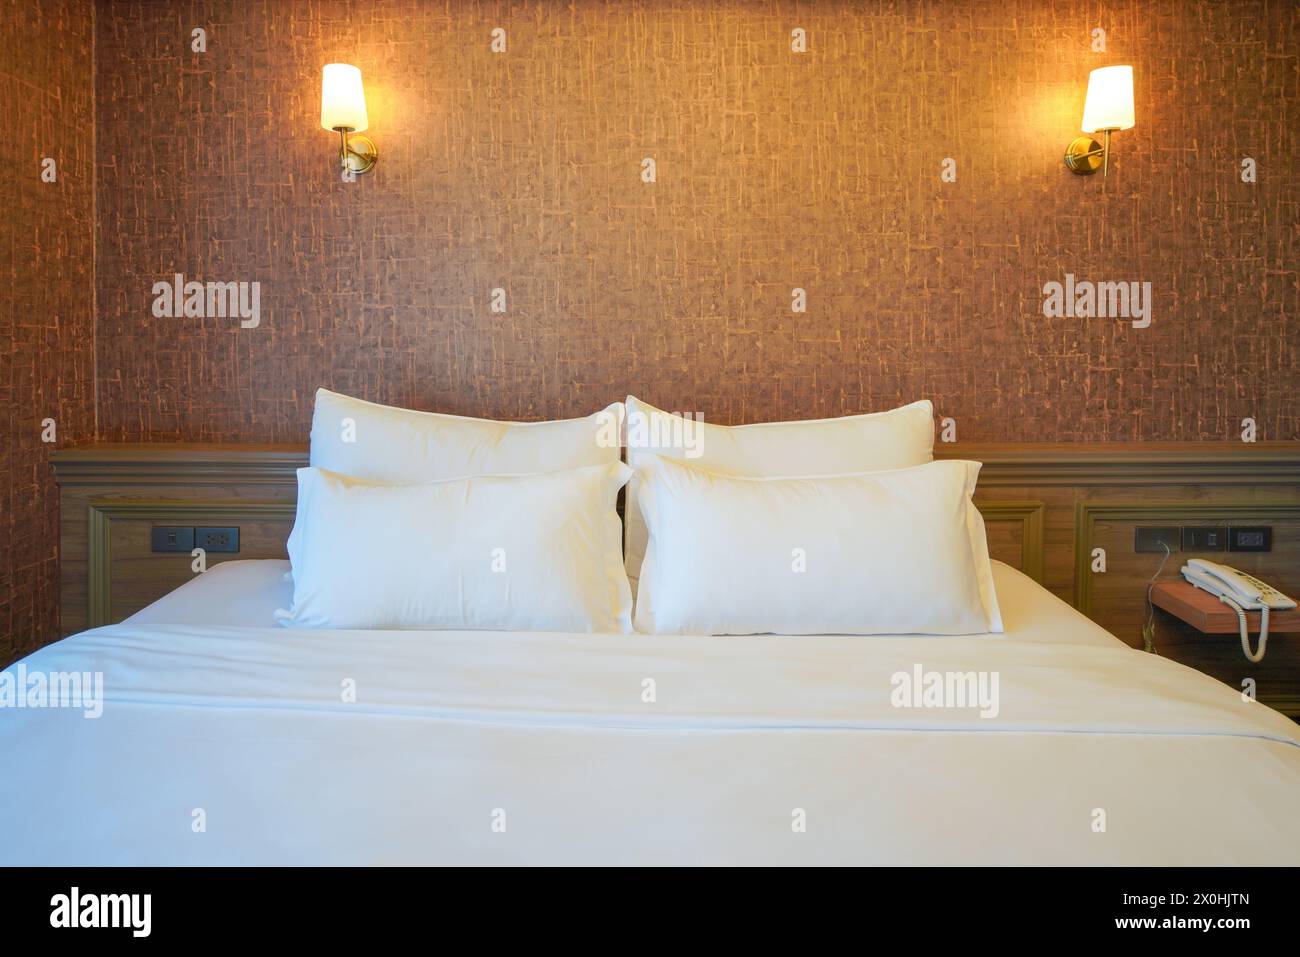 Welcome to a peaceful slumber in this tranquil hotel bedroom that exudes a sense of calm and relaxation. The crisp, white bedding contrasts beautifull Stock Photo